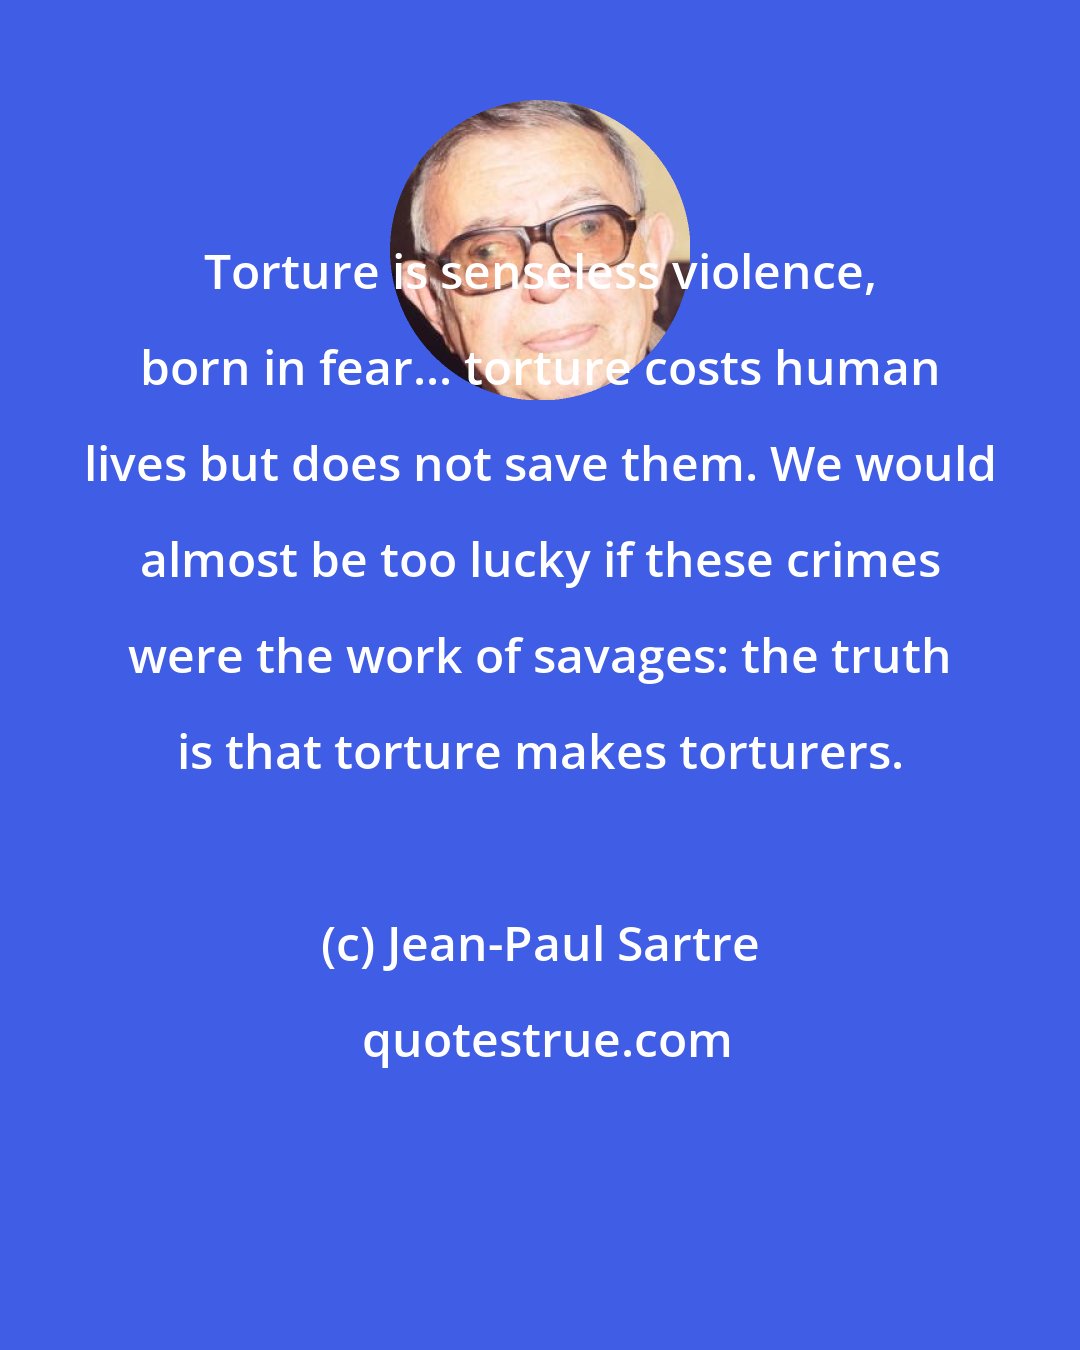 Jean-Paul Sartre: Torture is senseless violence, born in fear... torture costs human lives but does not save them. We would almost be too lucky if these crimes were the work of savages: the truth is that torture makes torturers.